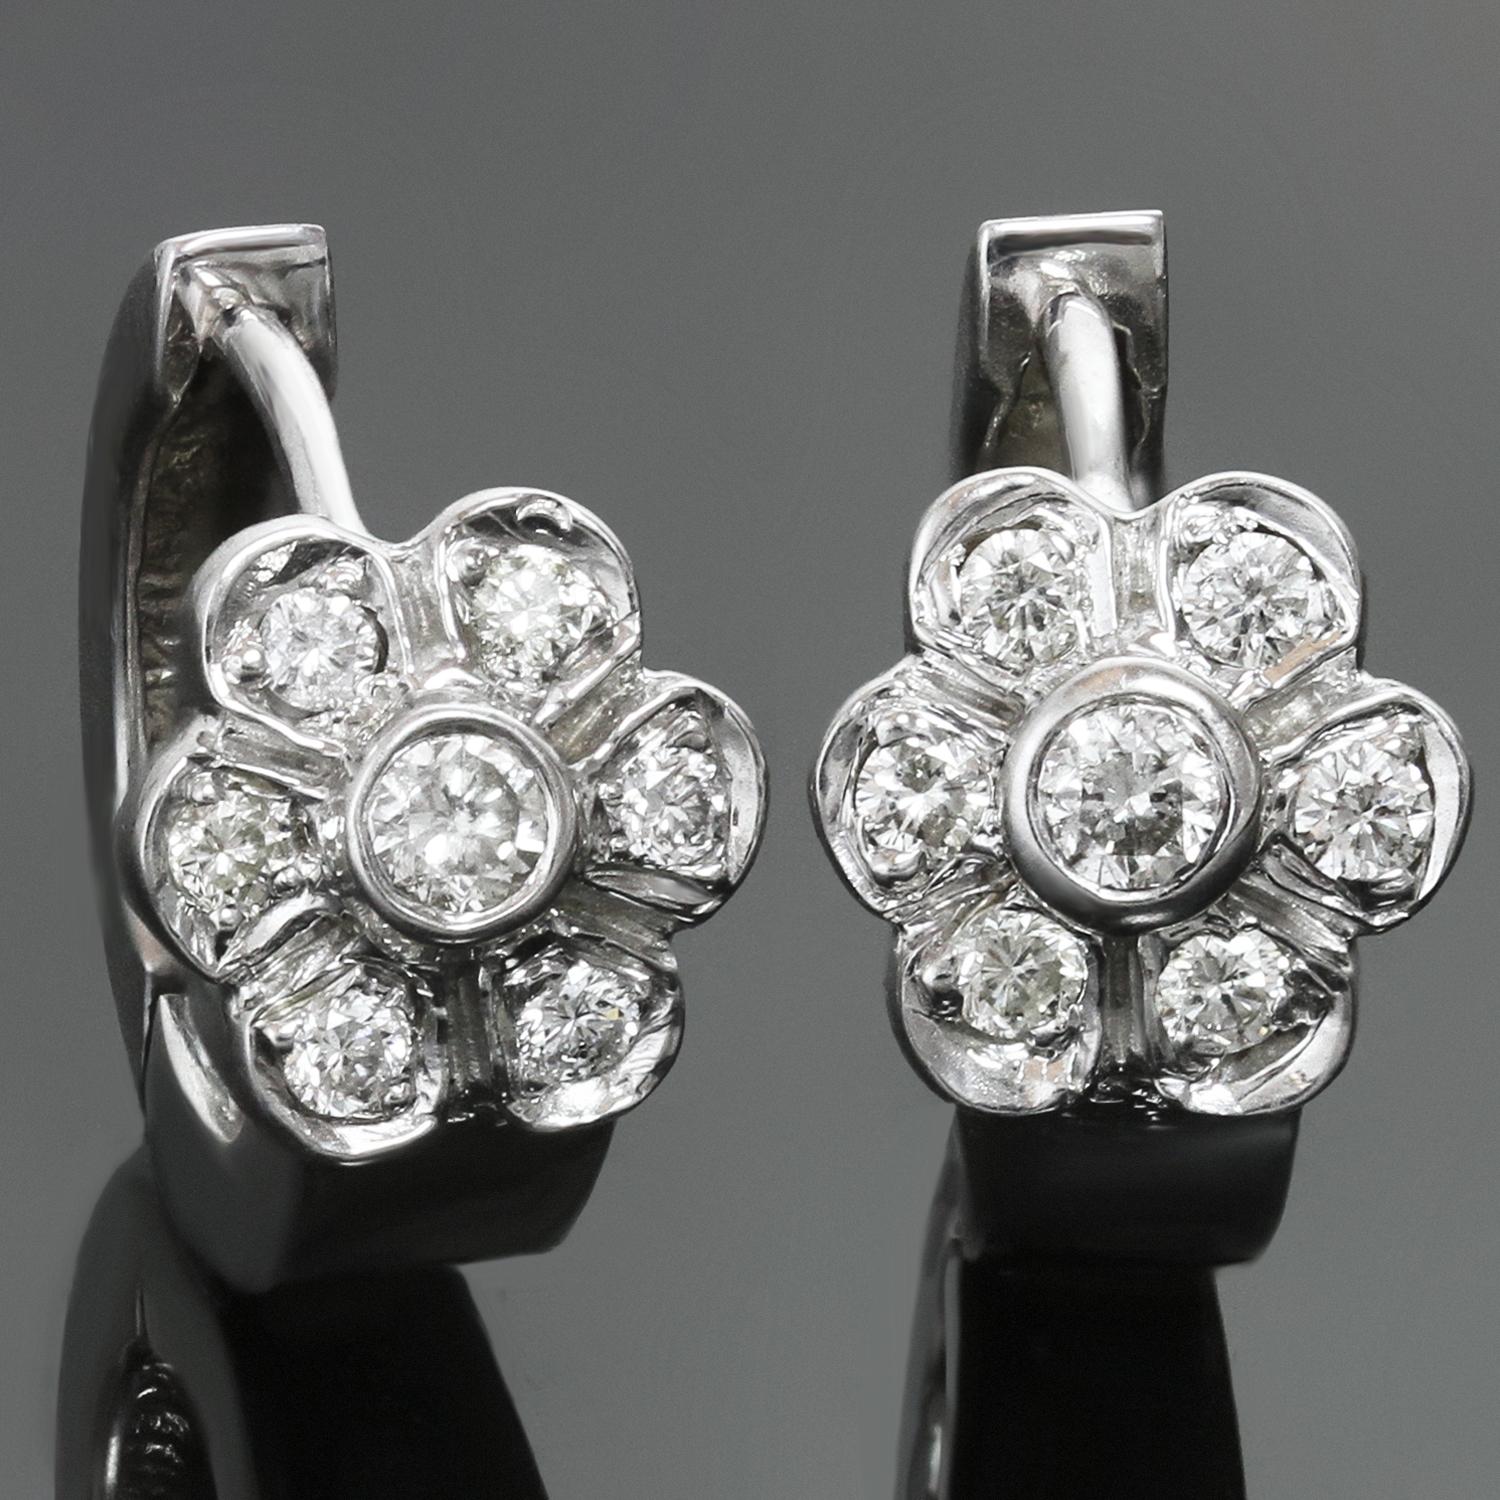 These elegant wrap earrings are crafted 14k white gold and feature a flower design set with brilliant-cut round diamonds of an estimated 0.38 carats. Made in United States circa 2000s. Measurements: 0.35